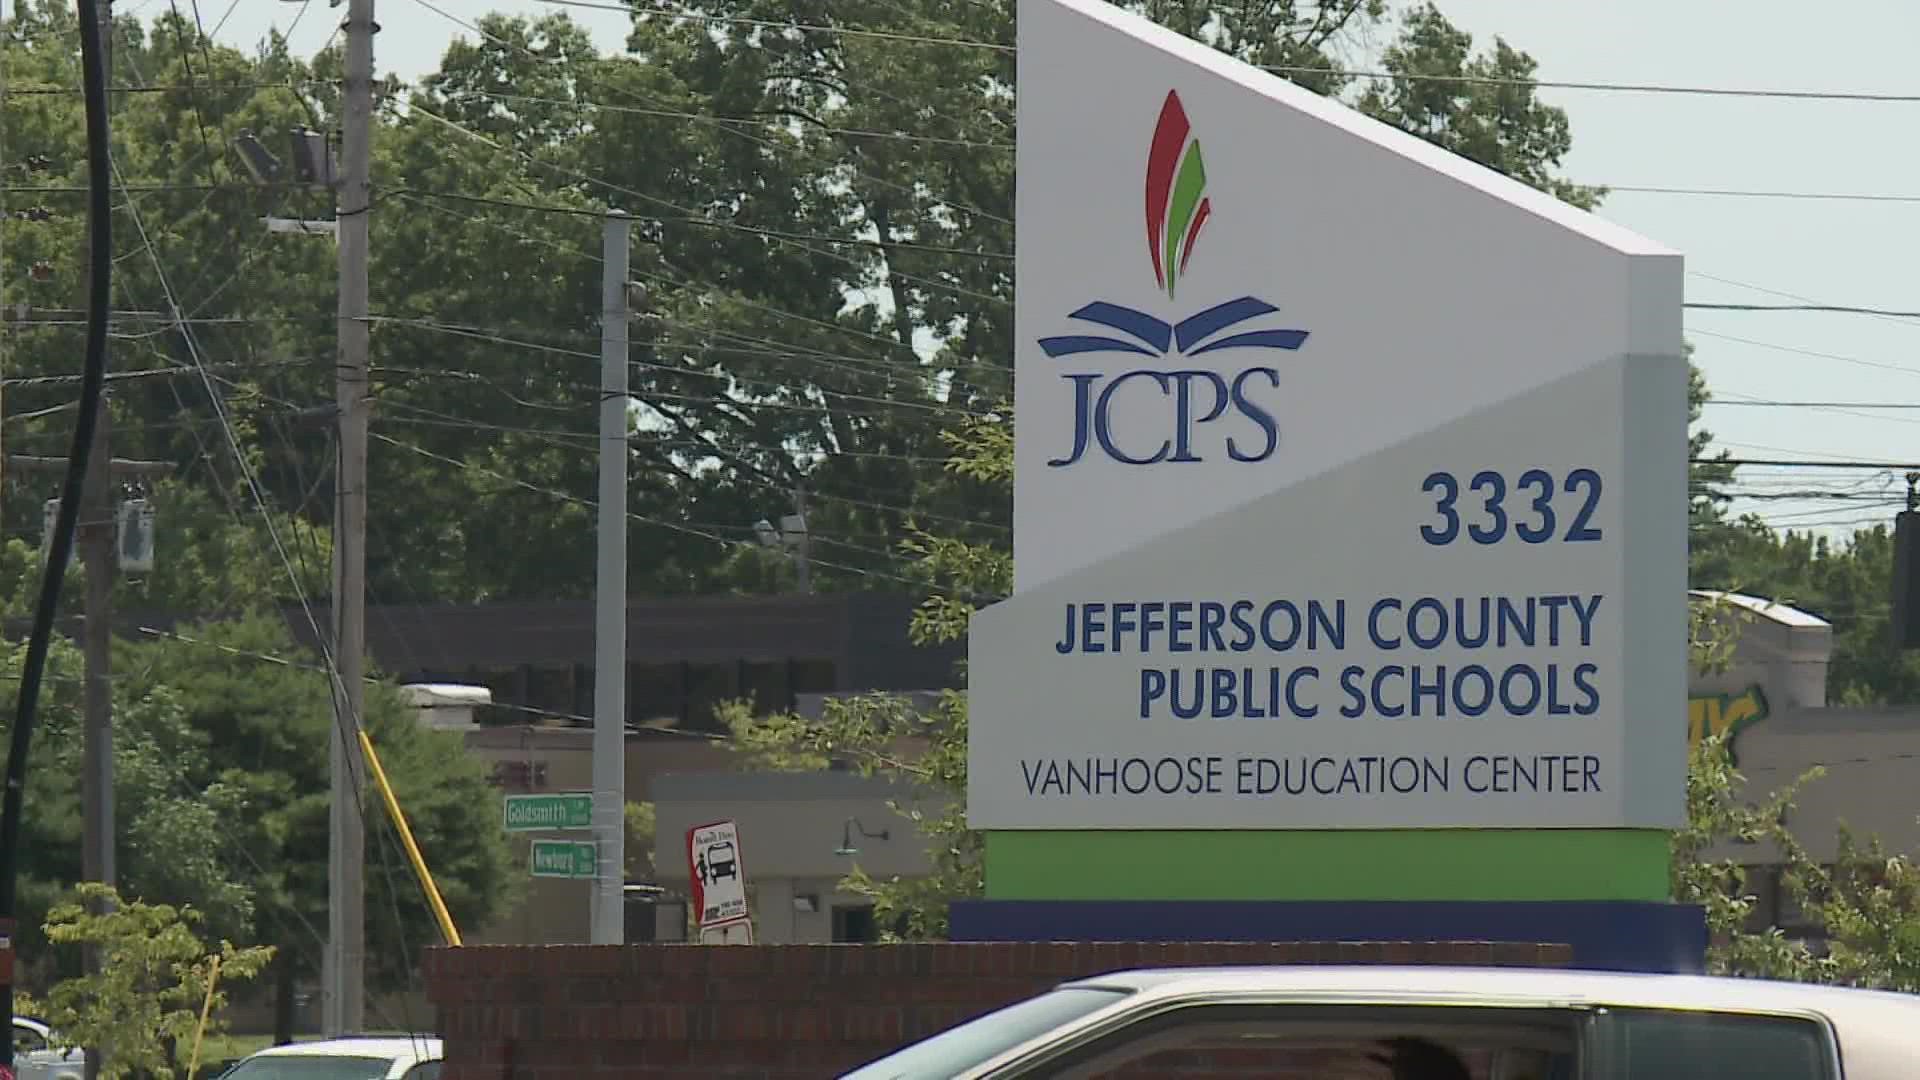 A Kentucky judge has ruled portions of Senate Bill 1 are unconstitutional because it targets just the Jefferson County school district.